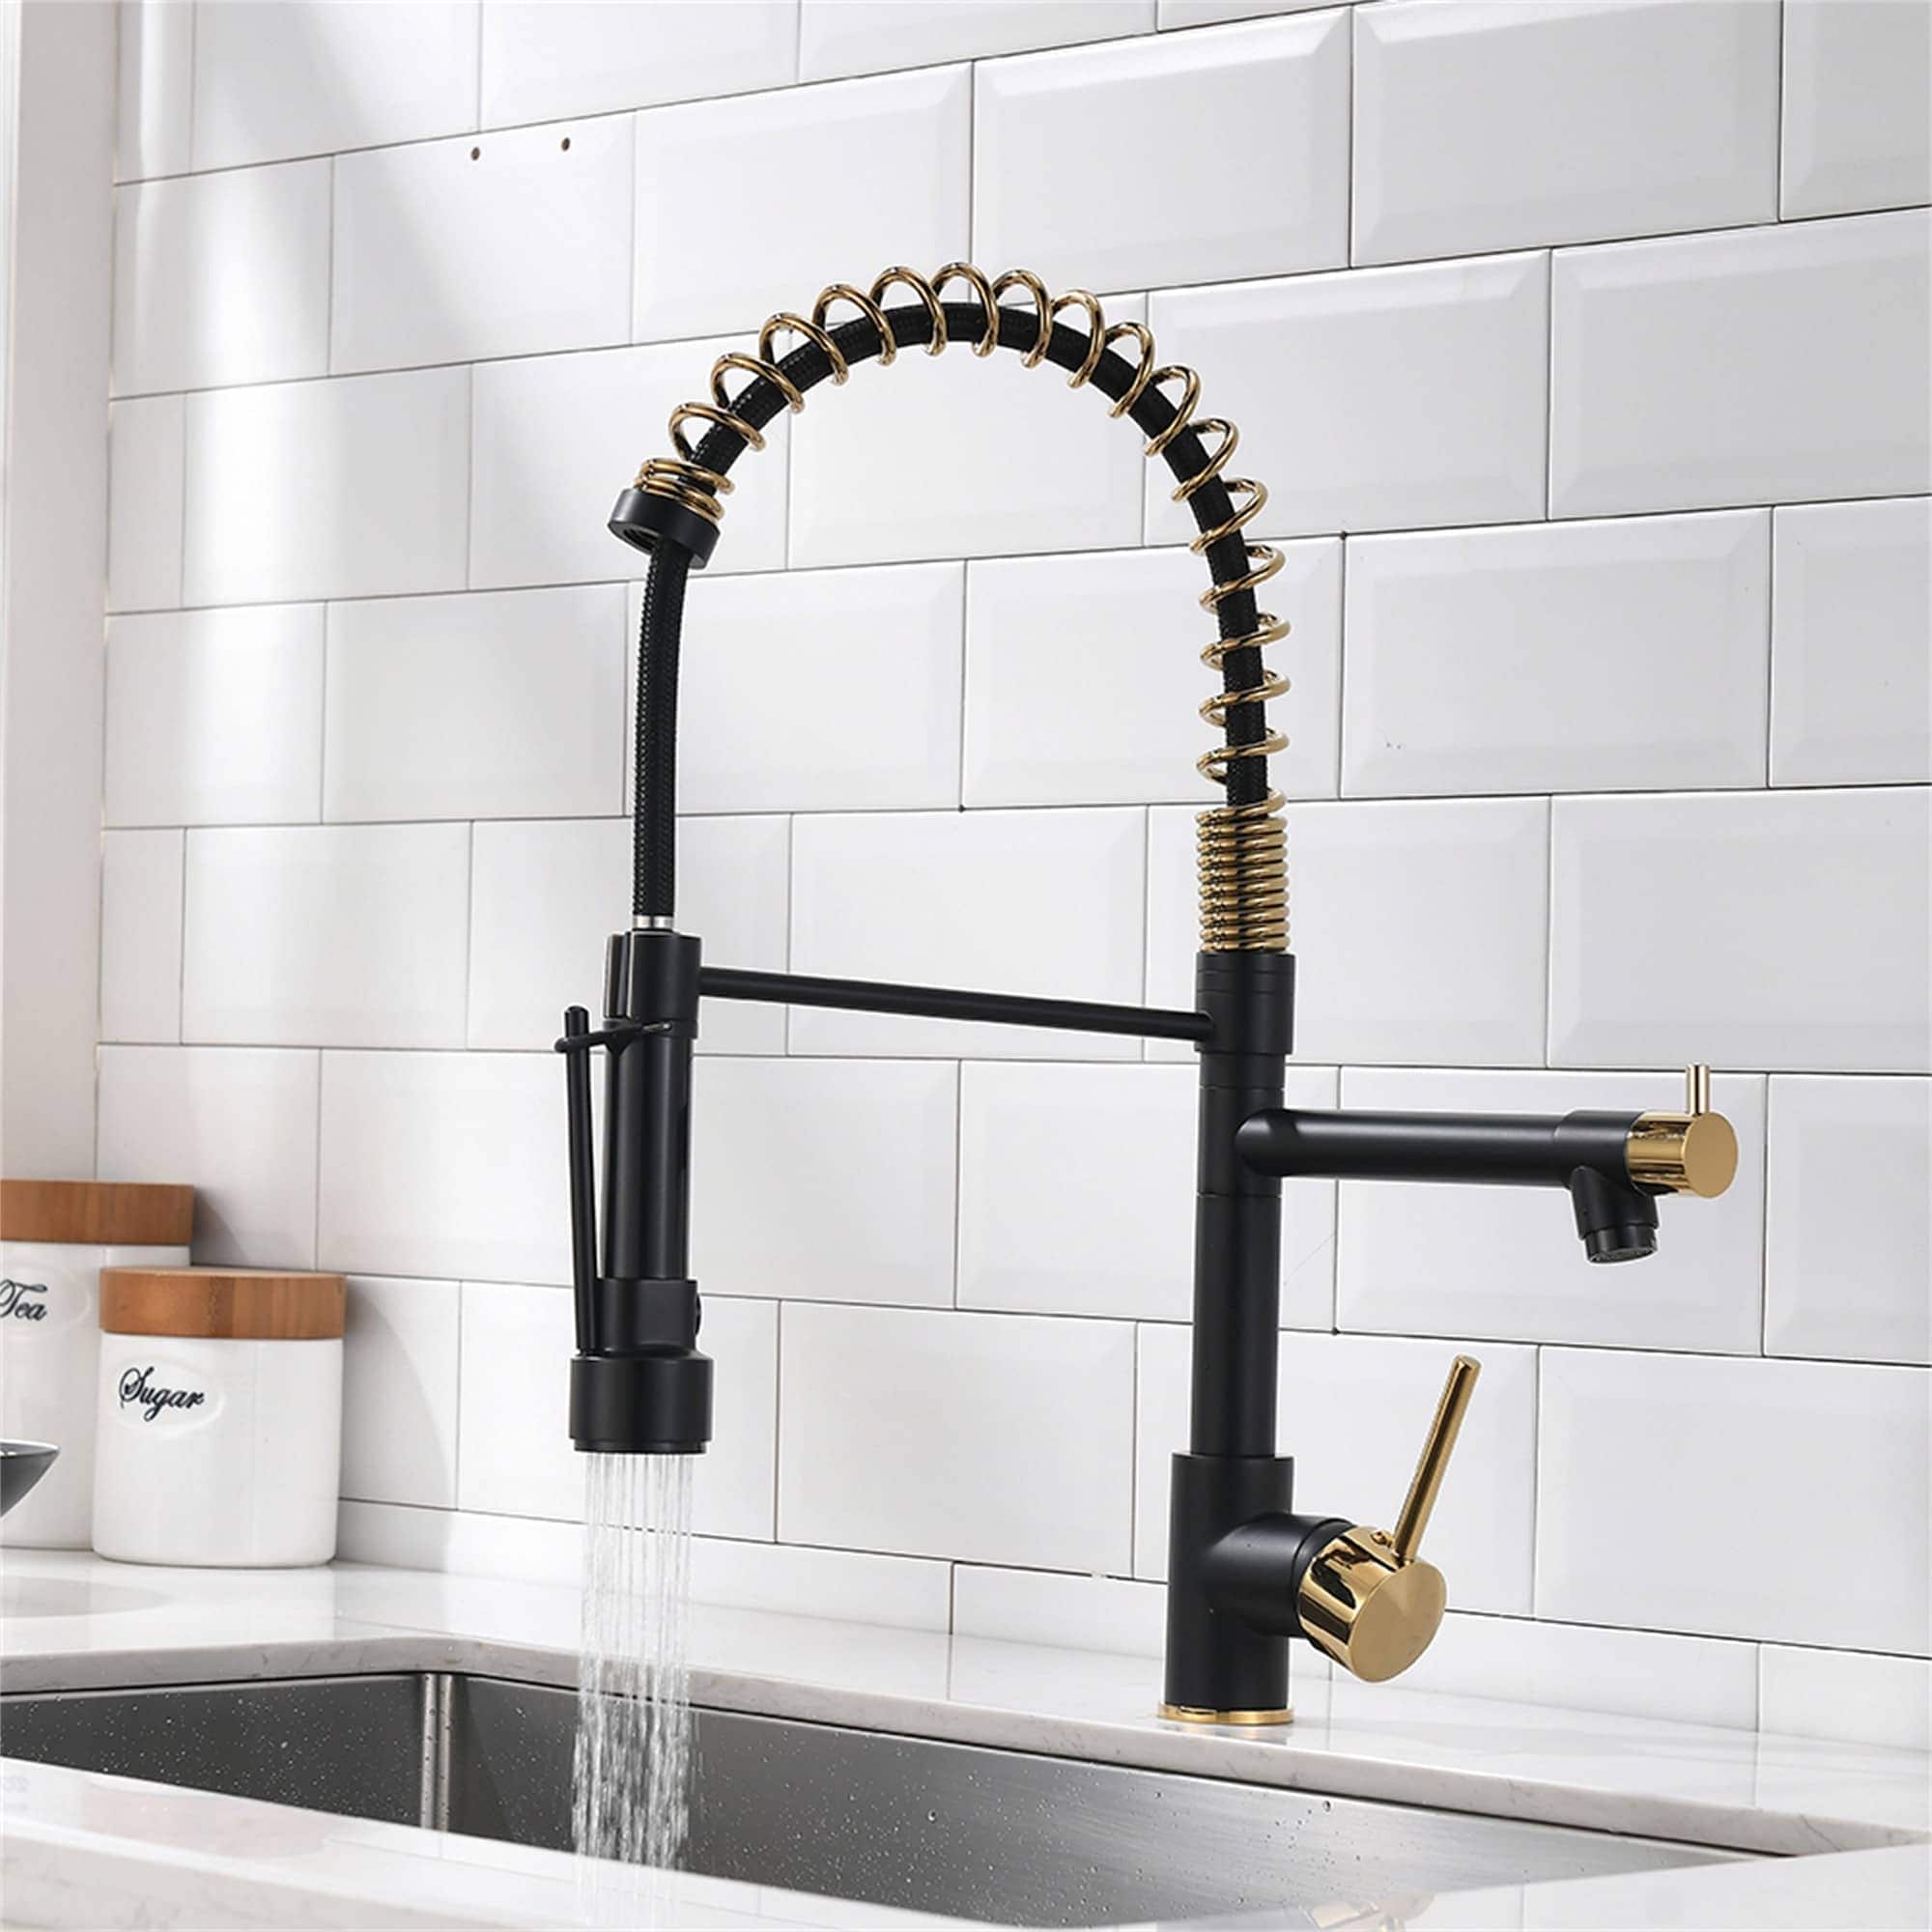 Bellver 1-Handle Kitchen Faucet with Metal Spray 1, 2, 3, or 4 Hole